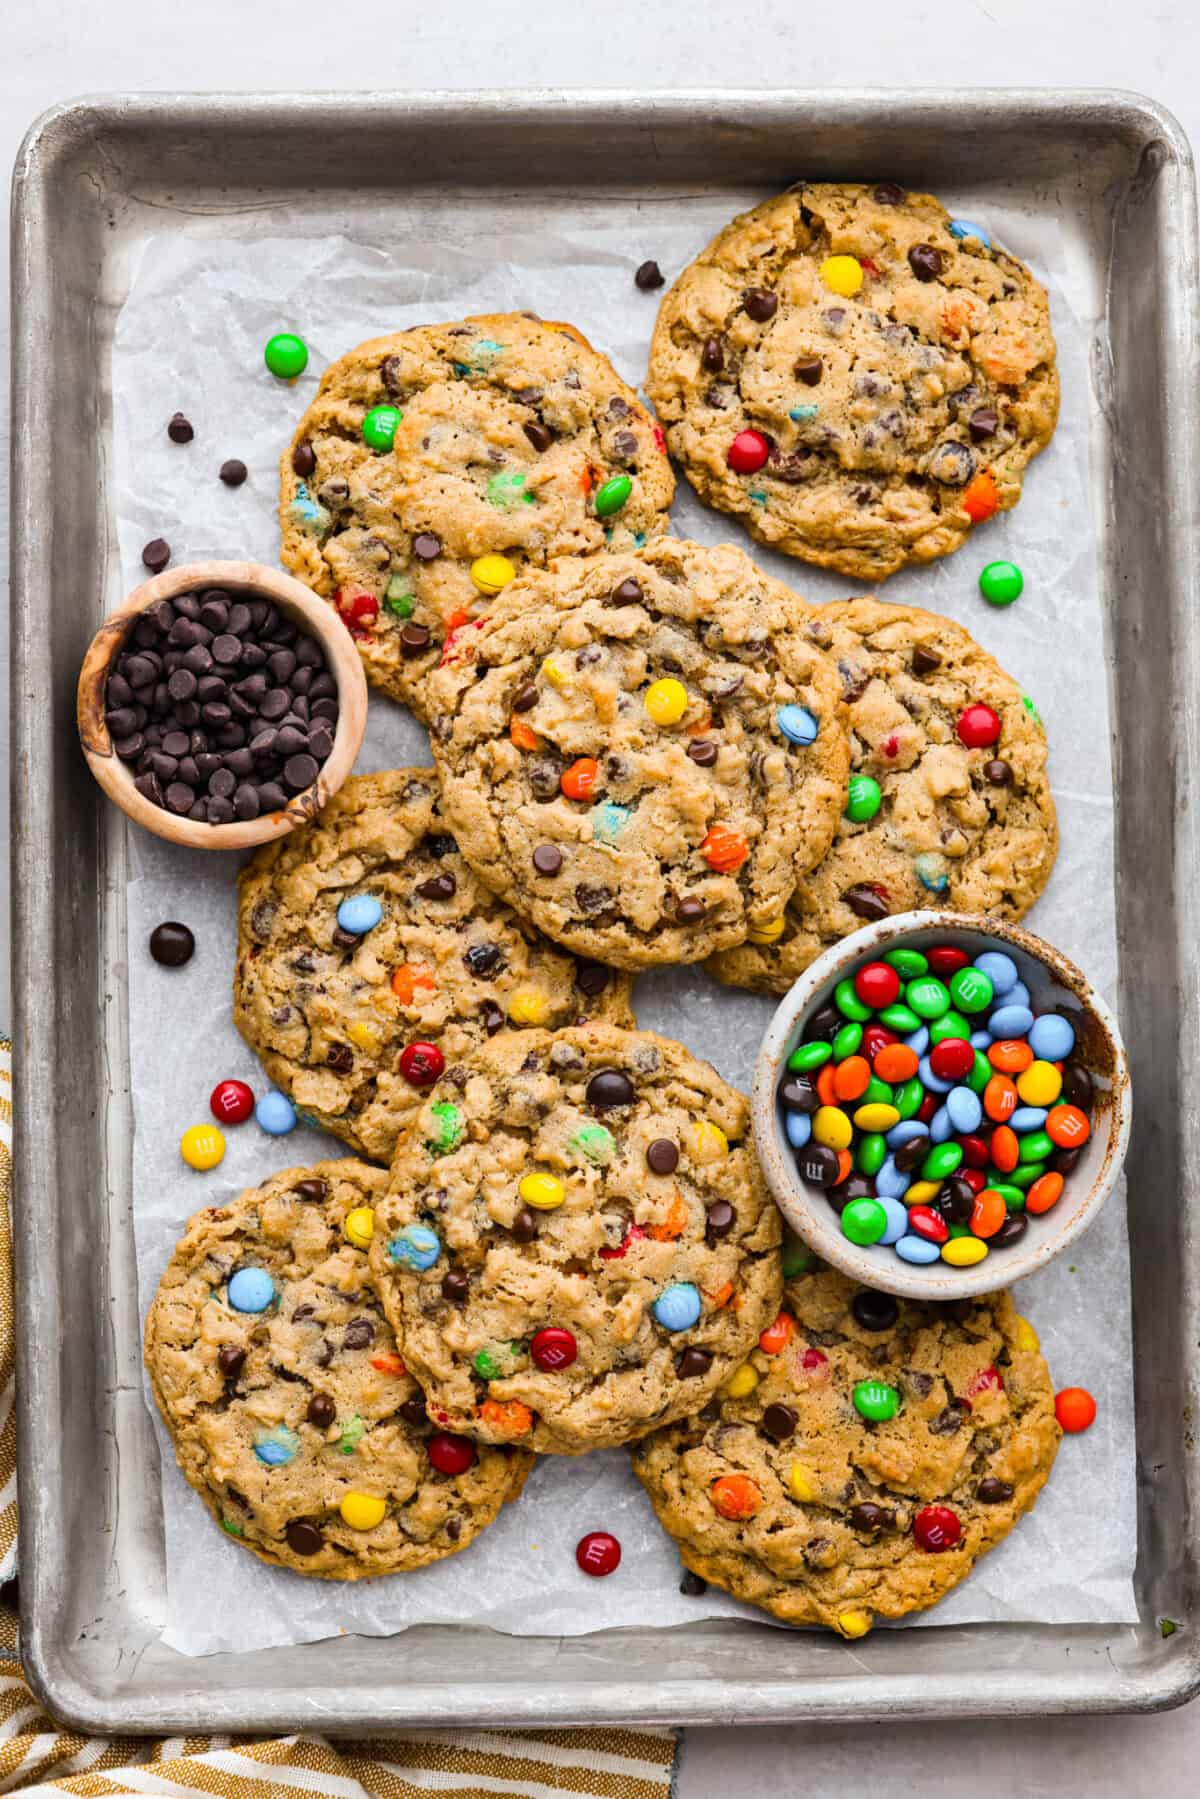 Top view of monster cookies on a sheet pan with bowls of M&M's and chocolate chips.